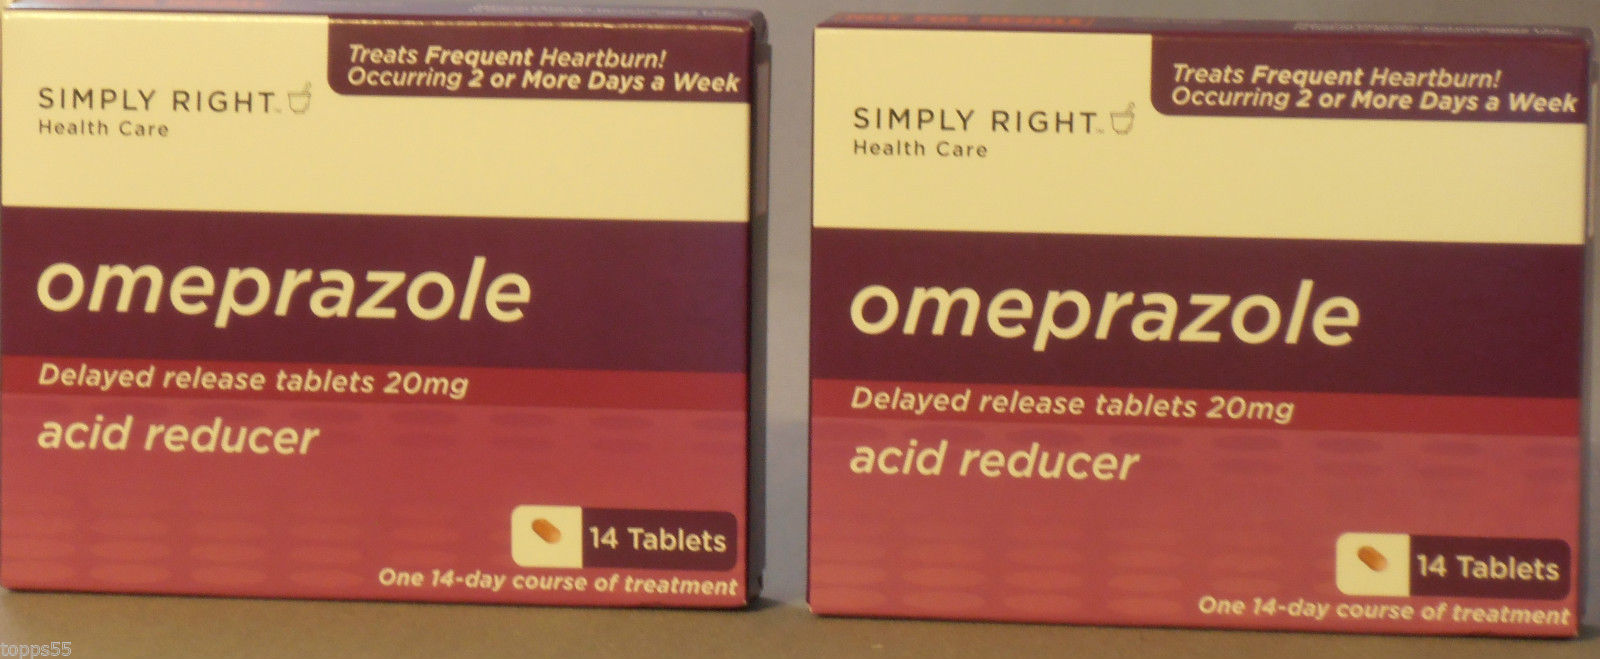 28ct Simply Right Generic Omeprazole OTC Acid Reducer HeartburnTablets 20mg New -- US Delivery